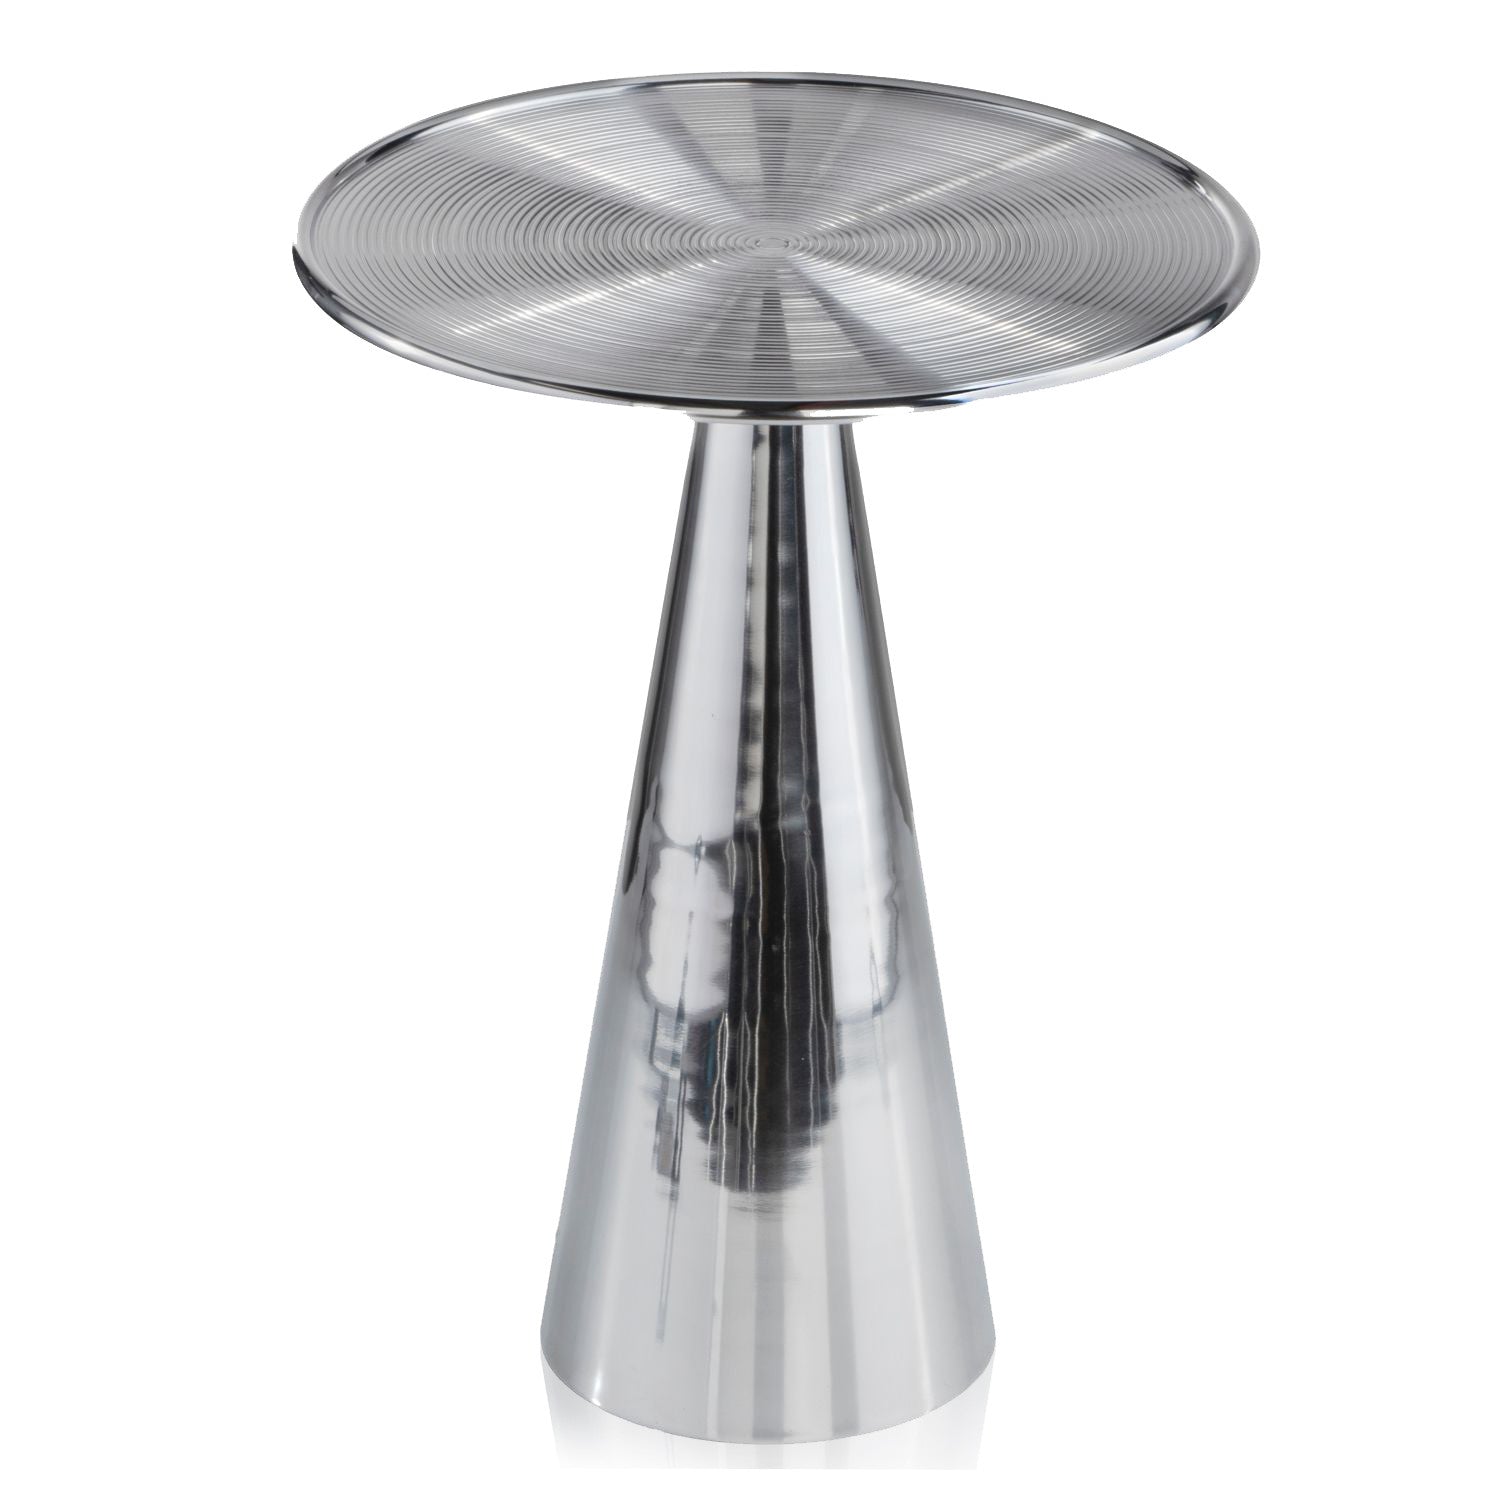 20" Silver Aluminum Round End Table